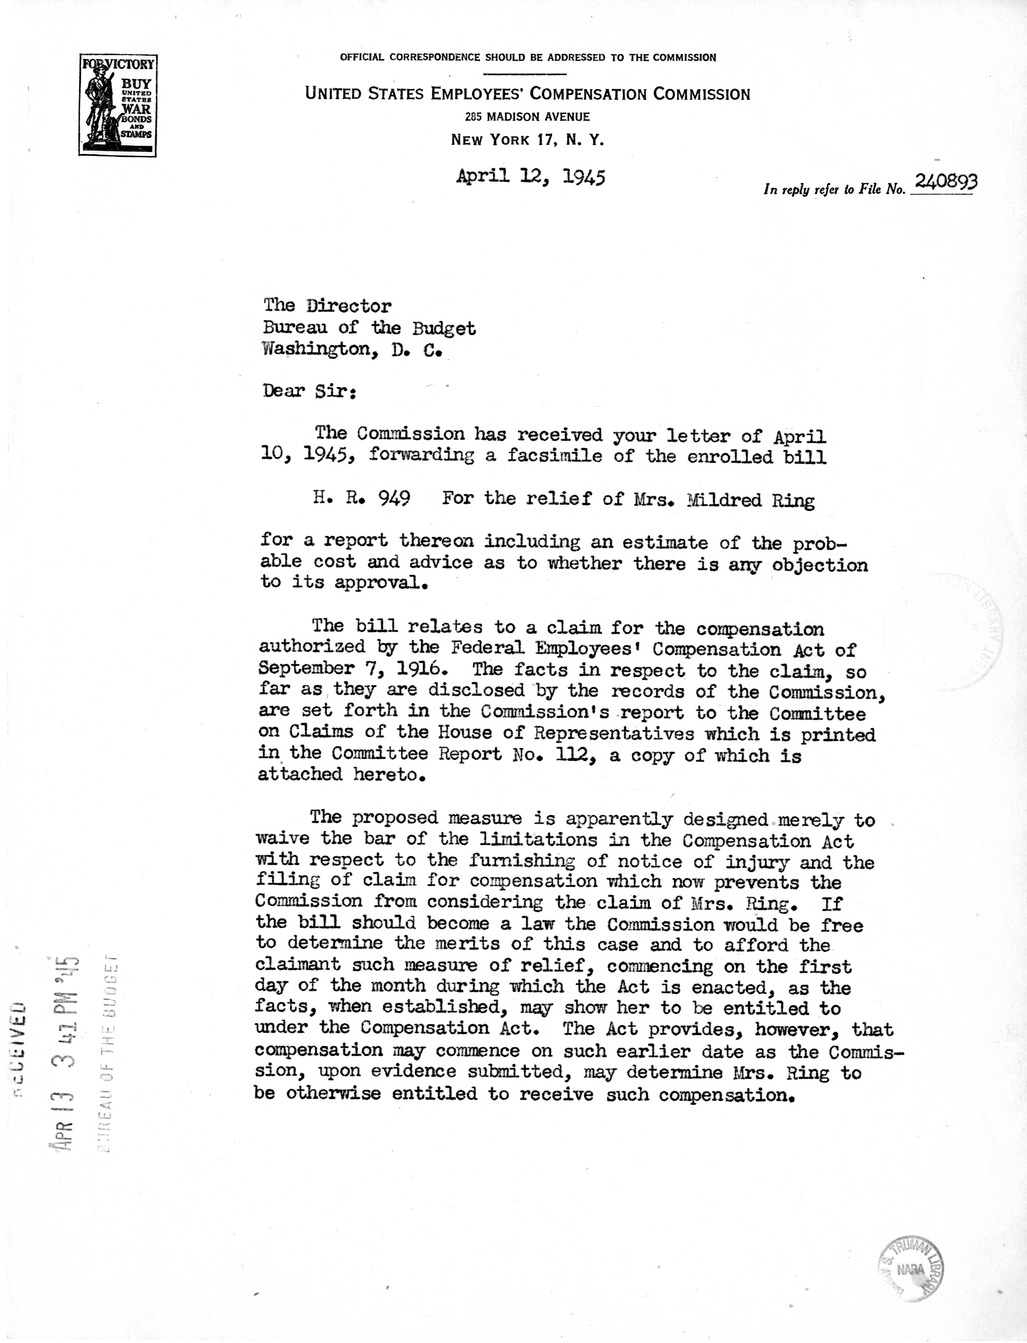 Memorandum from Harold D. Smith to M. C. Latta, H. R. 949, for the Relief of Mrs. Mildred Ring, with Attachments